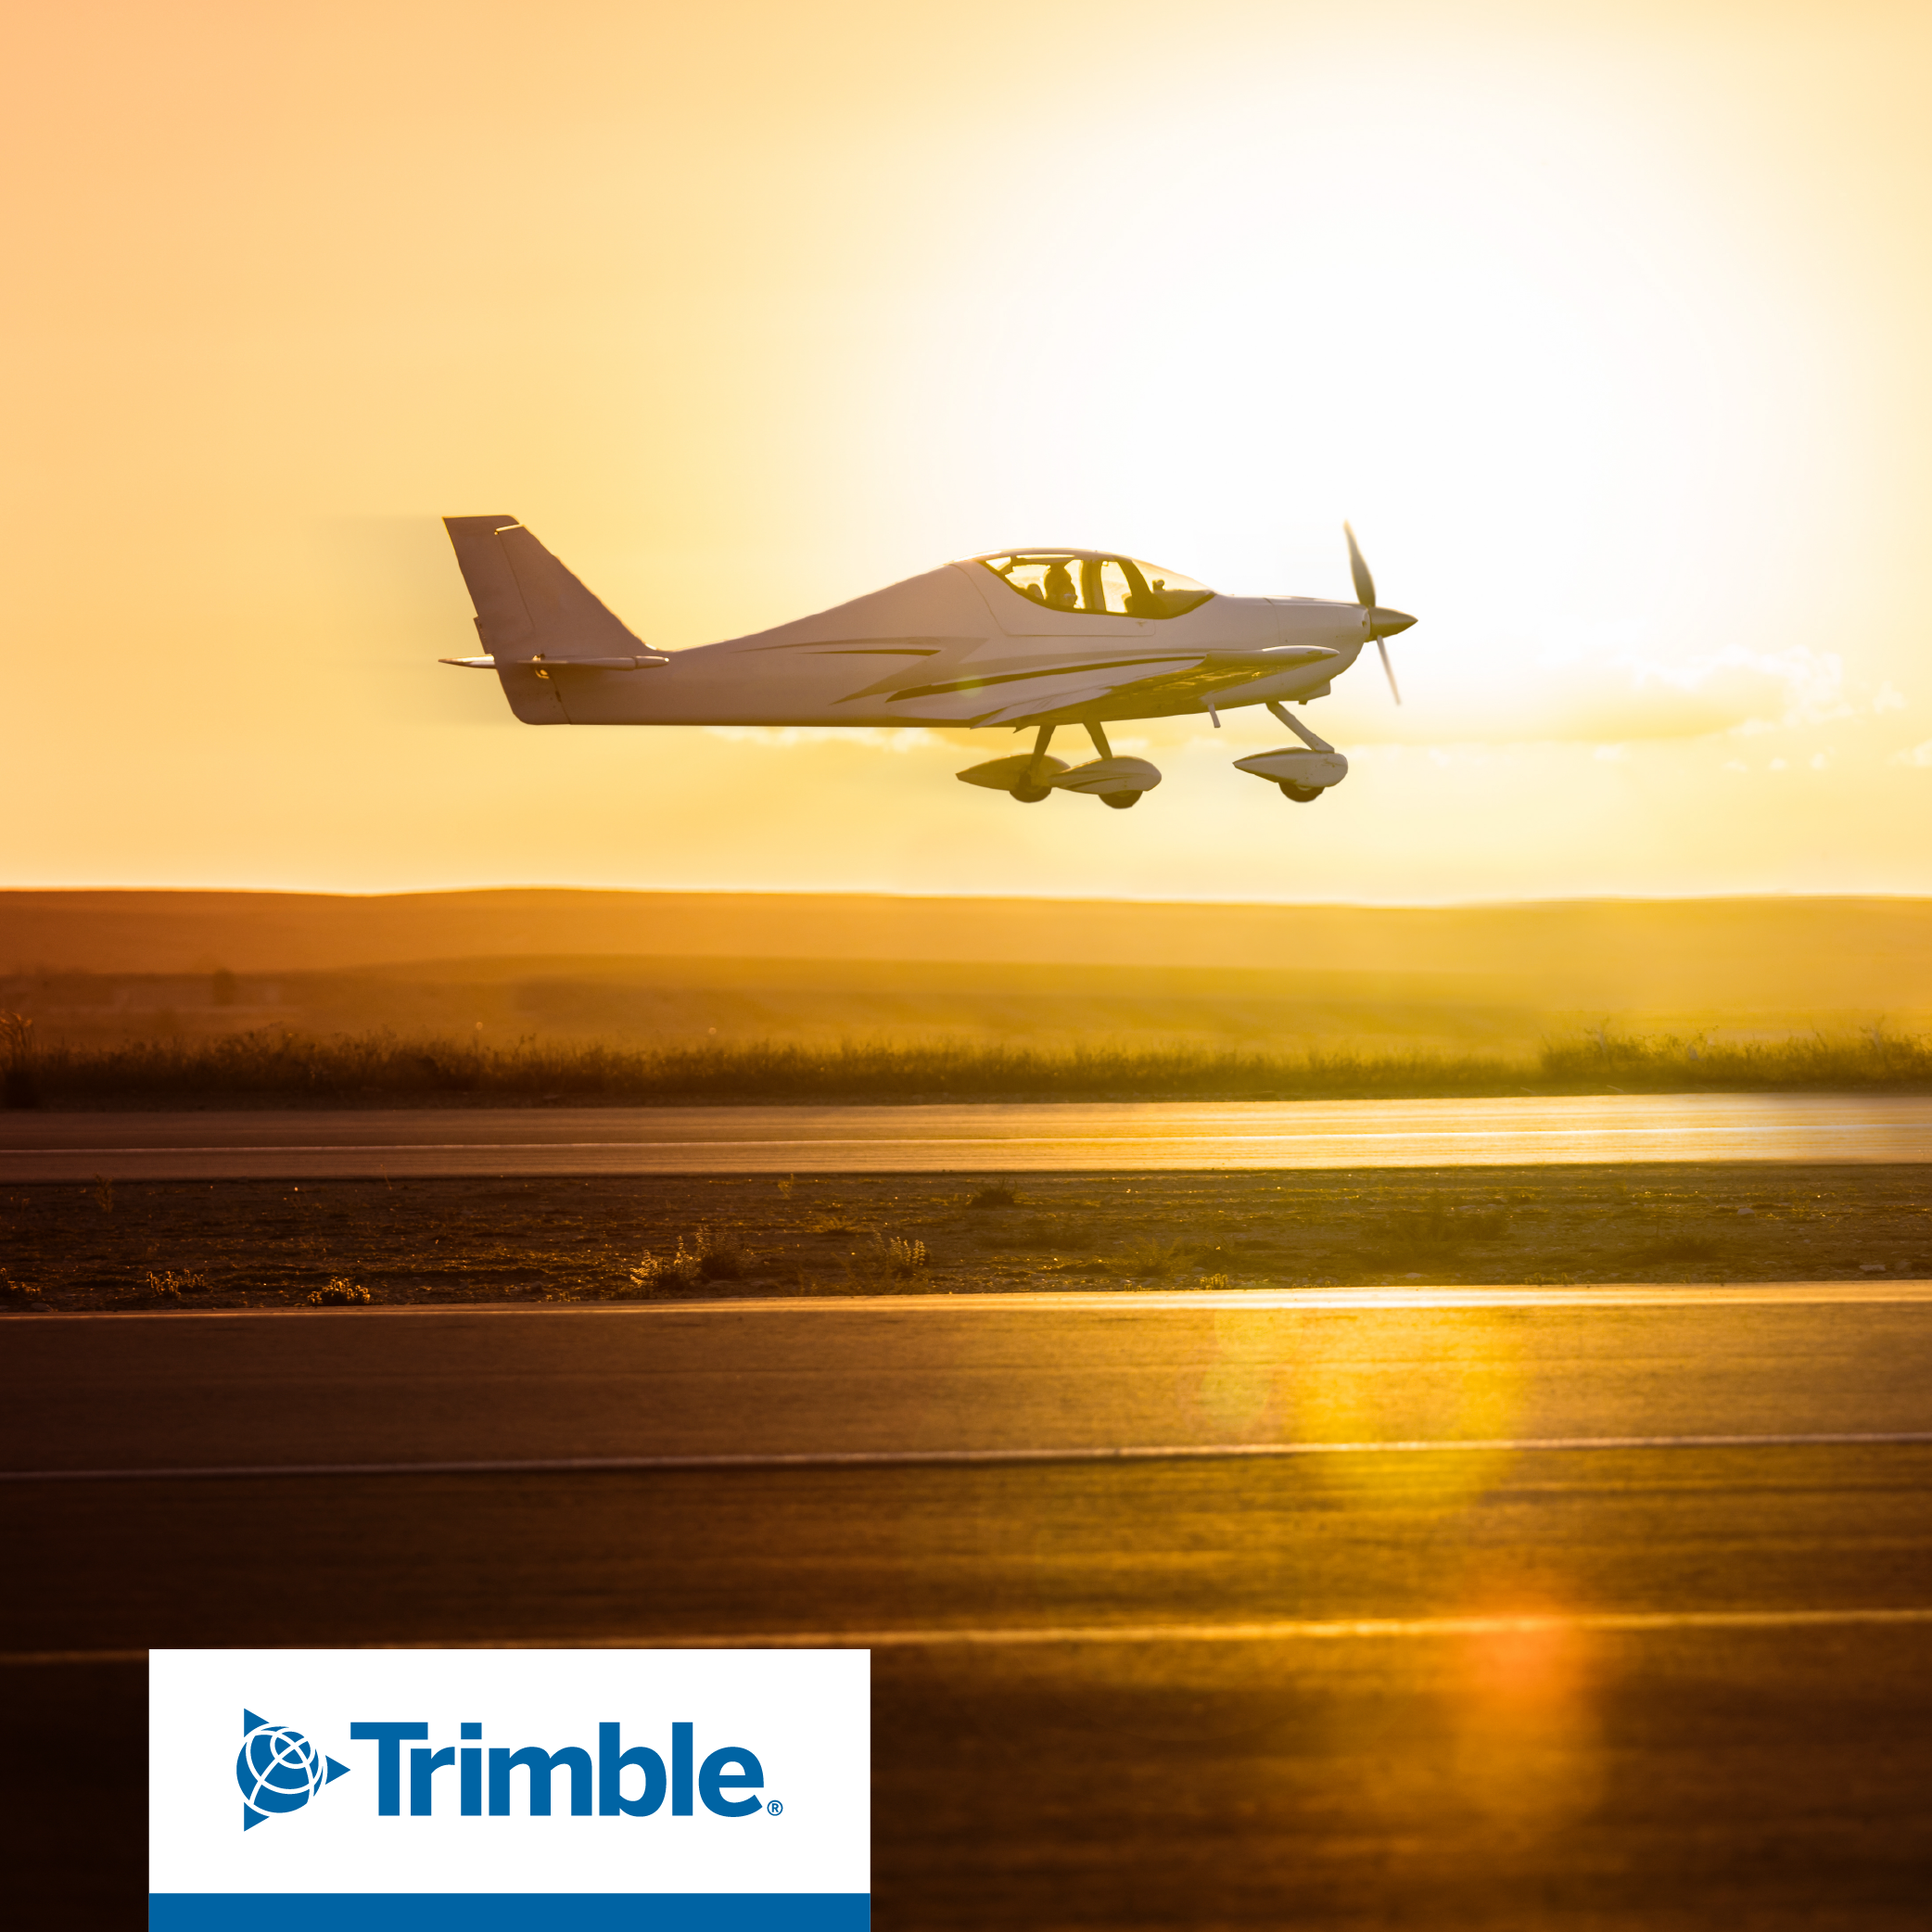 Achieving Centimeter-Level Accuracy in Crewed Airborne Surveys with Trimble's Applanix IN-Fusion PP-RTX Technology